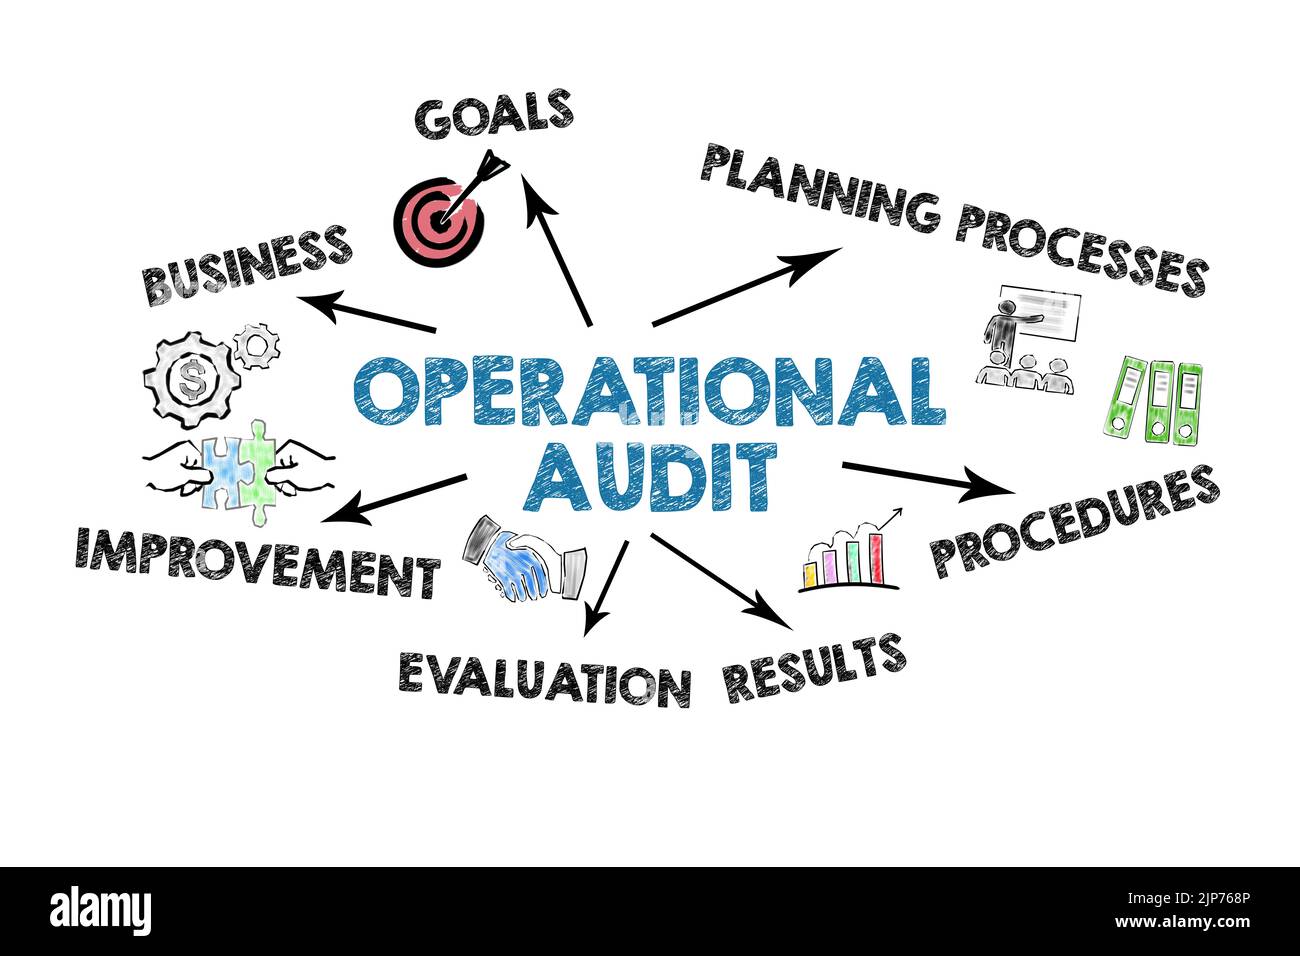 Operational Audit concept. Illustrated chart with key words and icons. Stock Photo